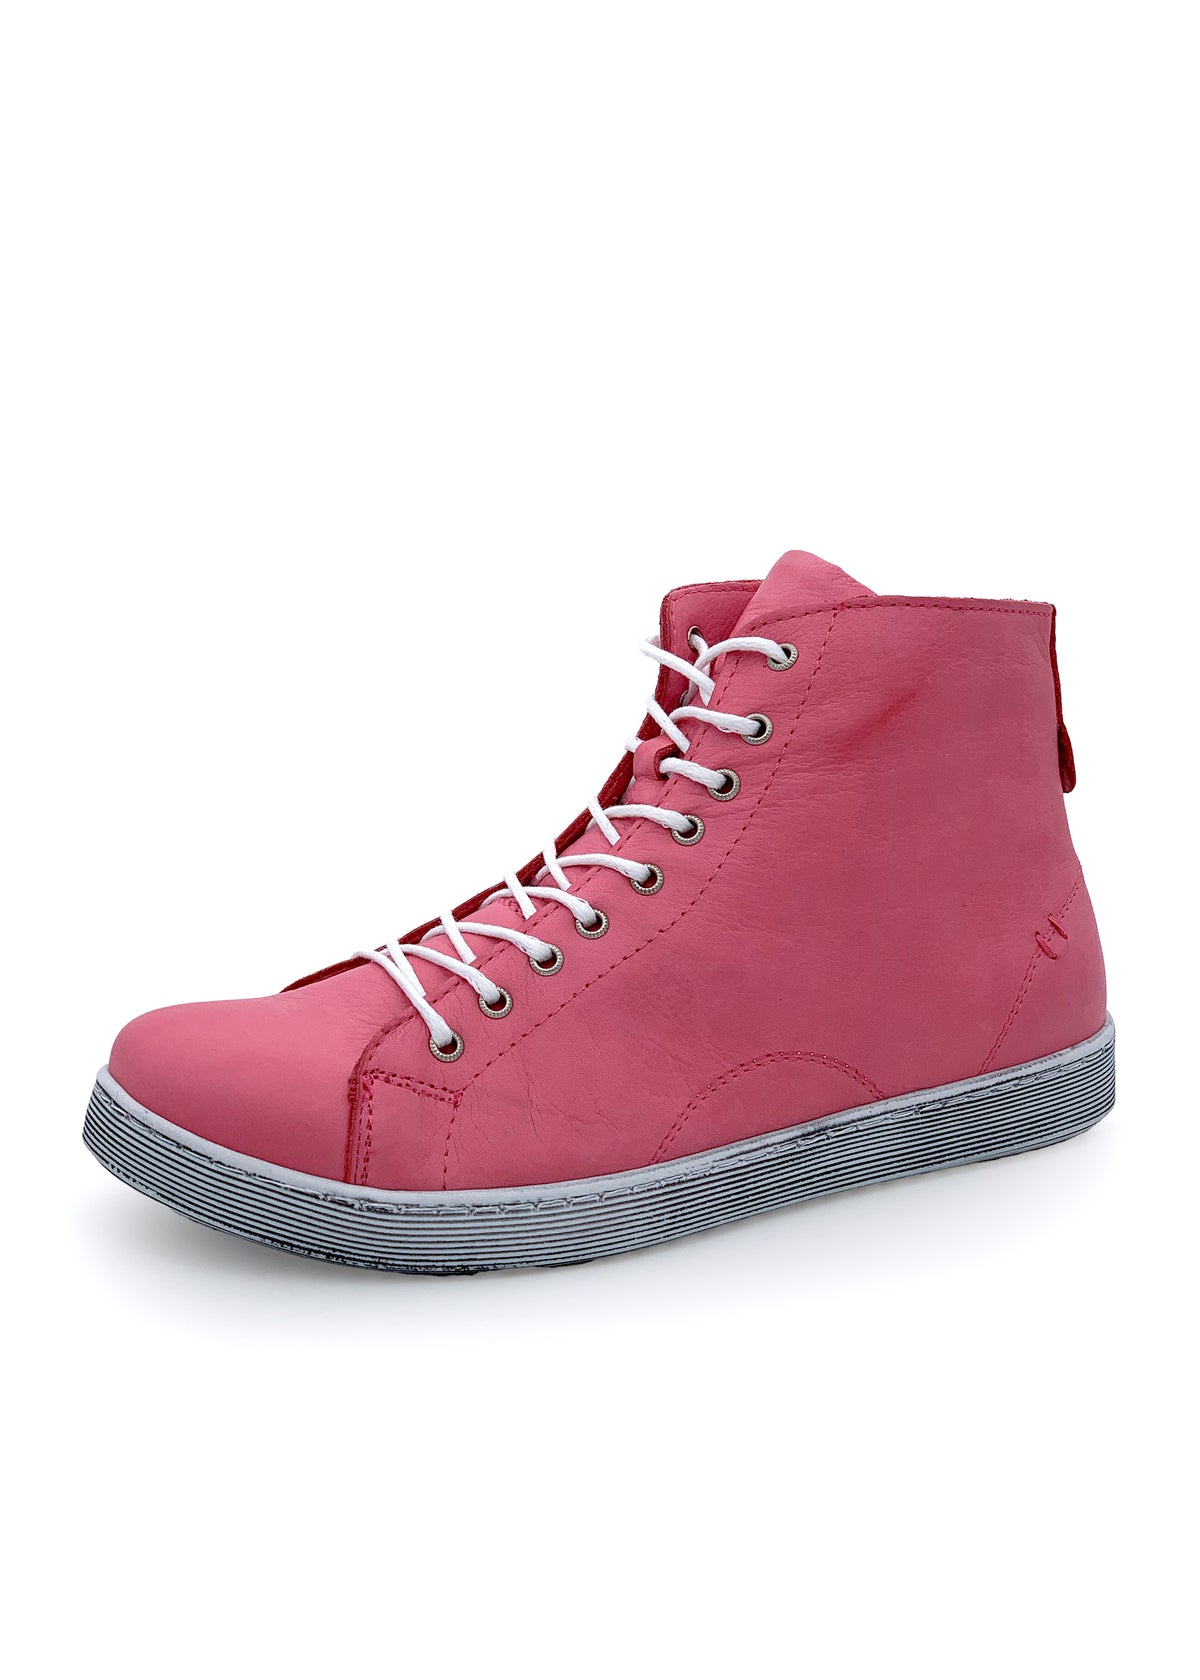 Sneakers with handles - pink